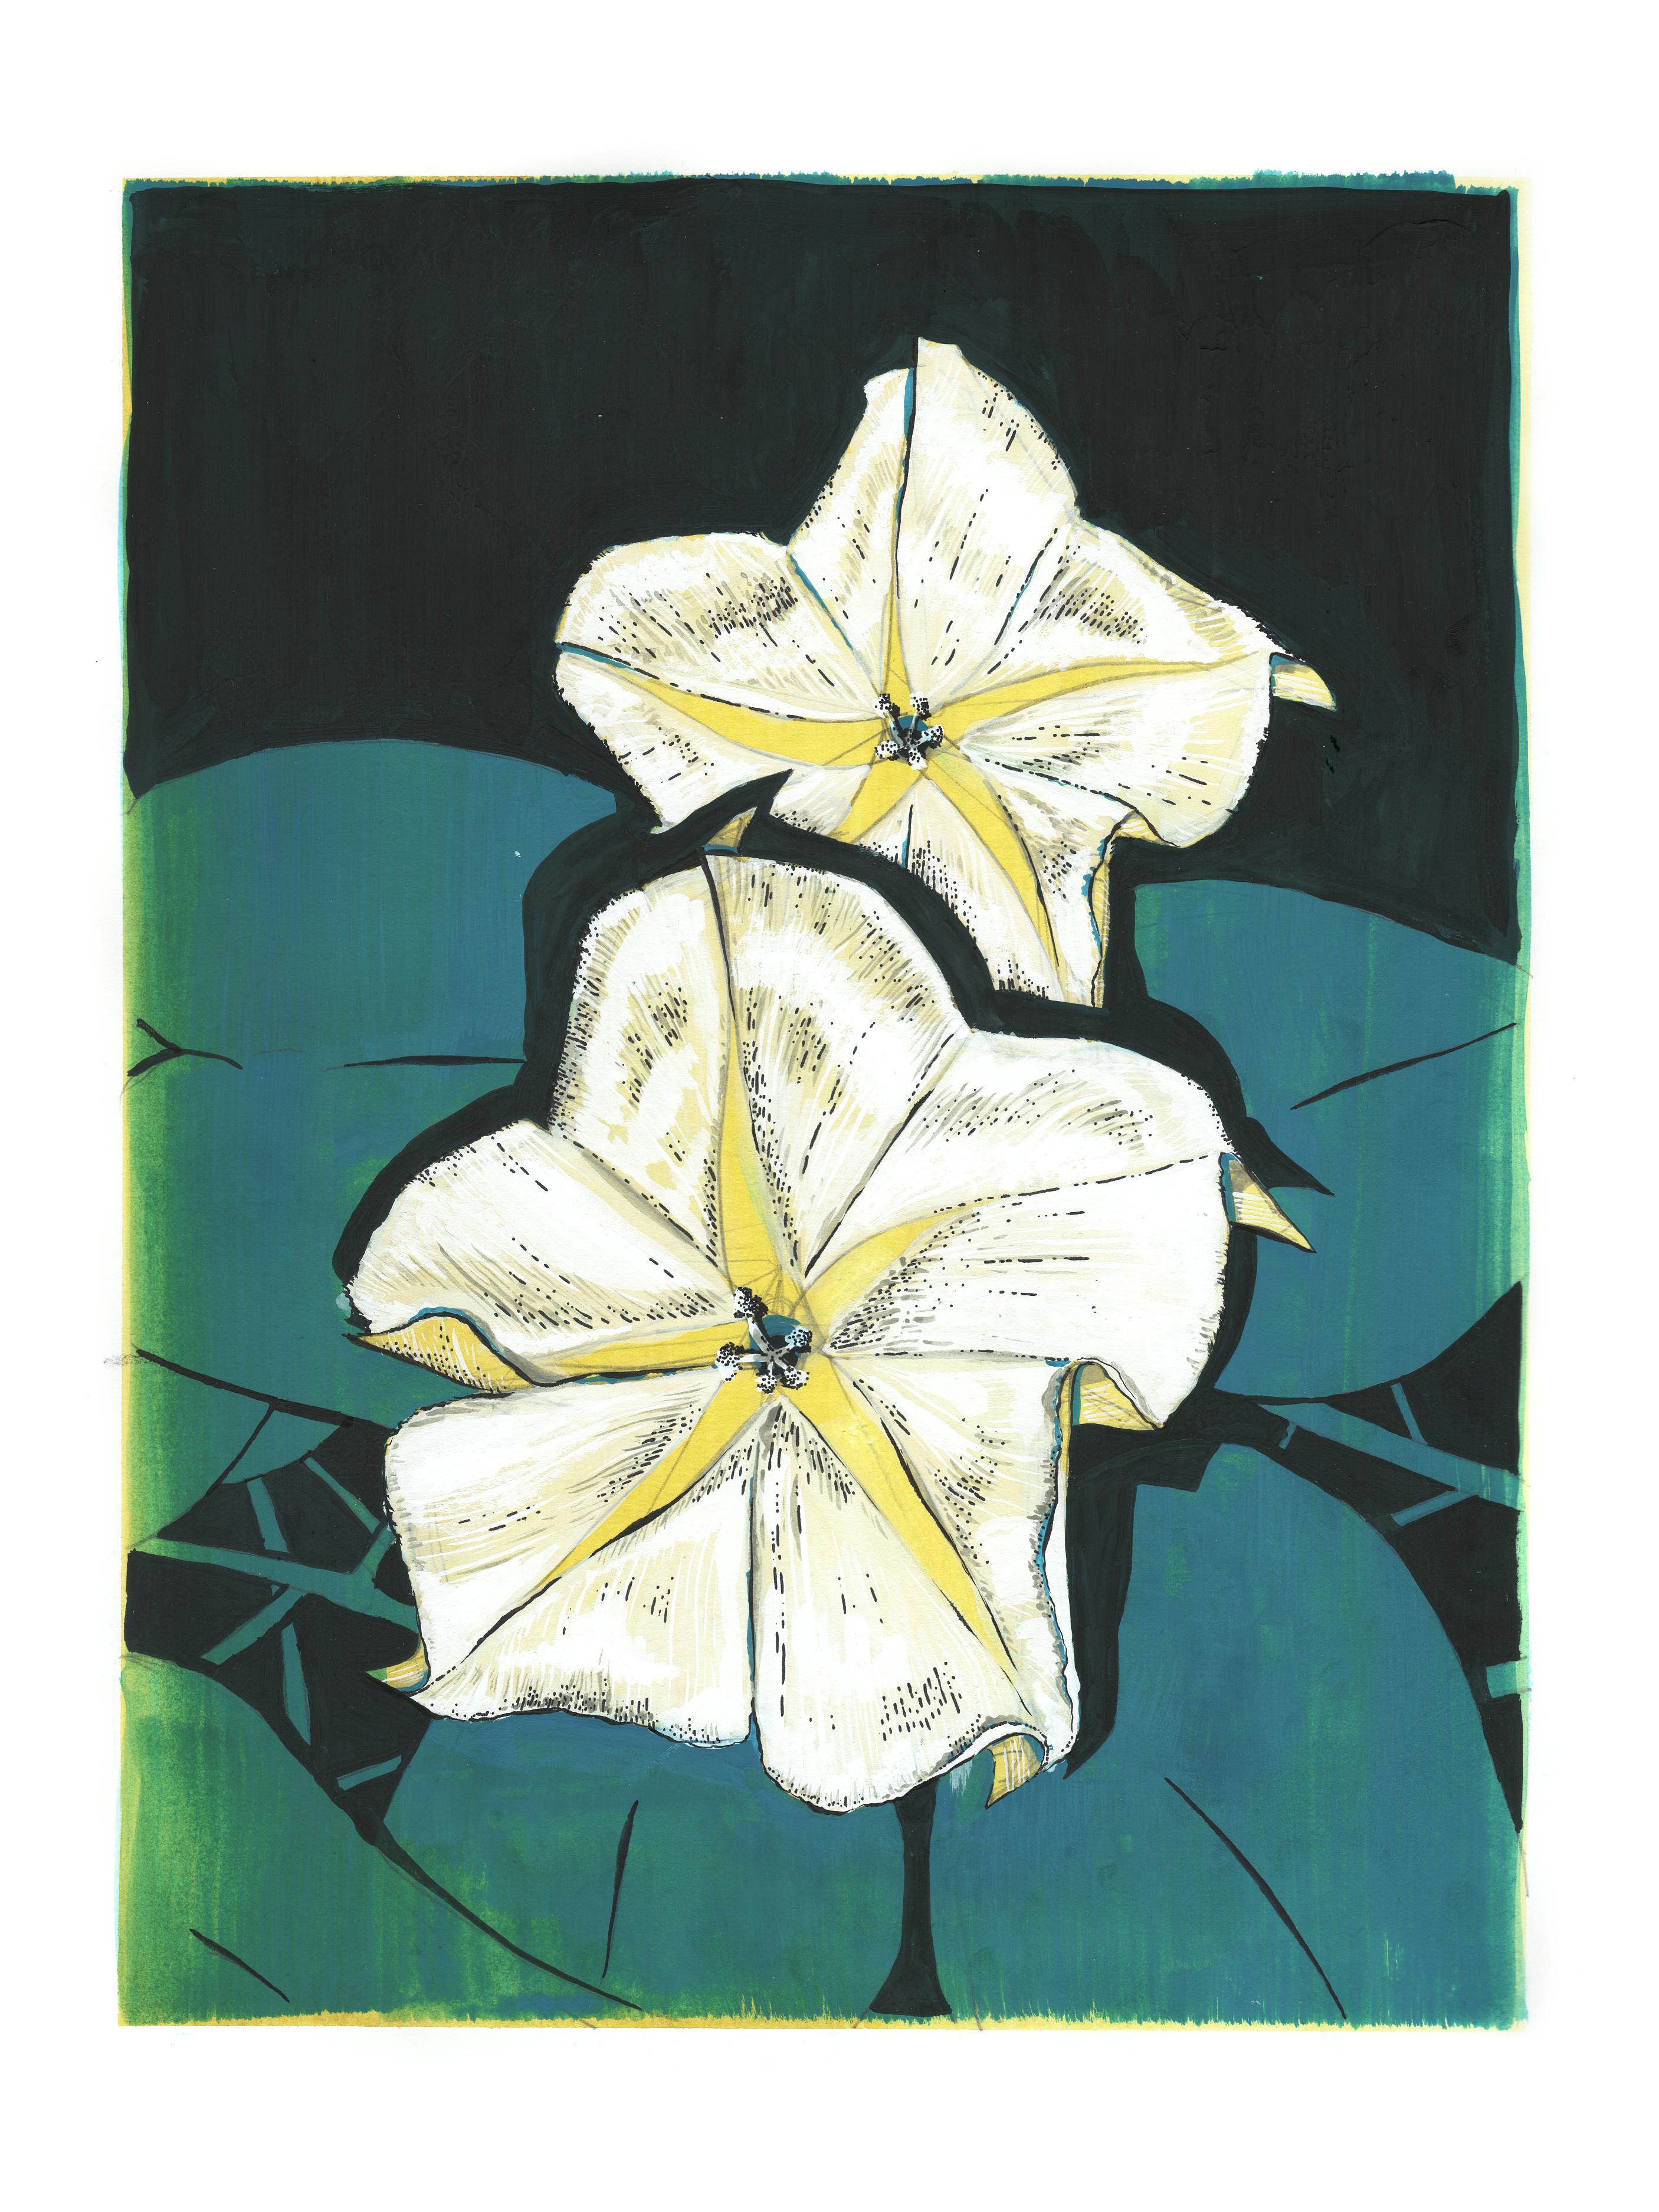 A scan of the moonflower drawing, with its original colors